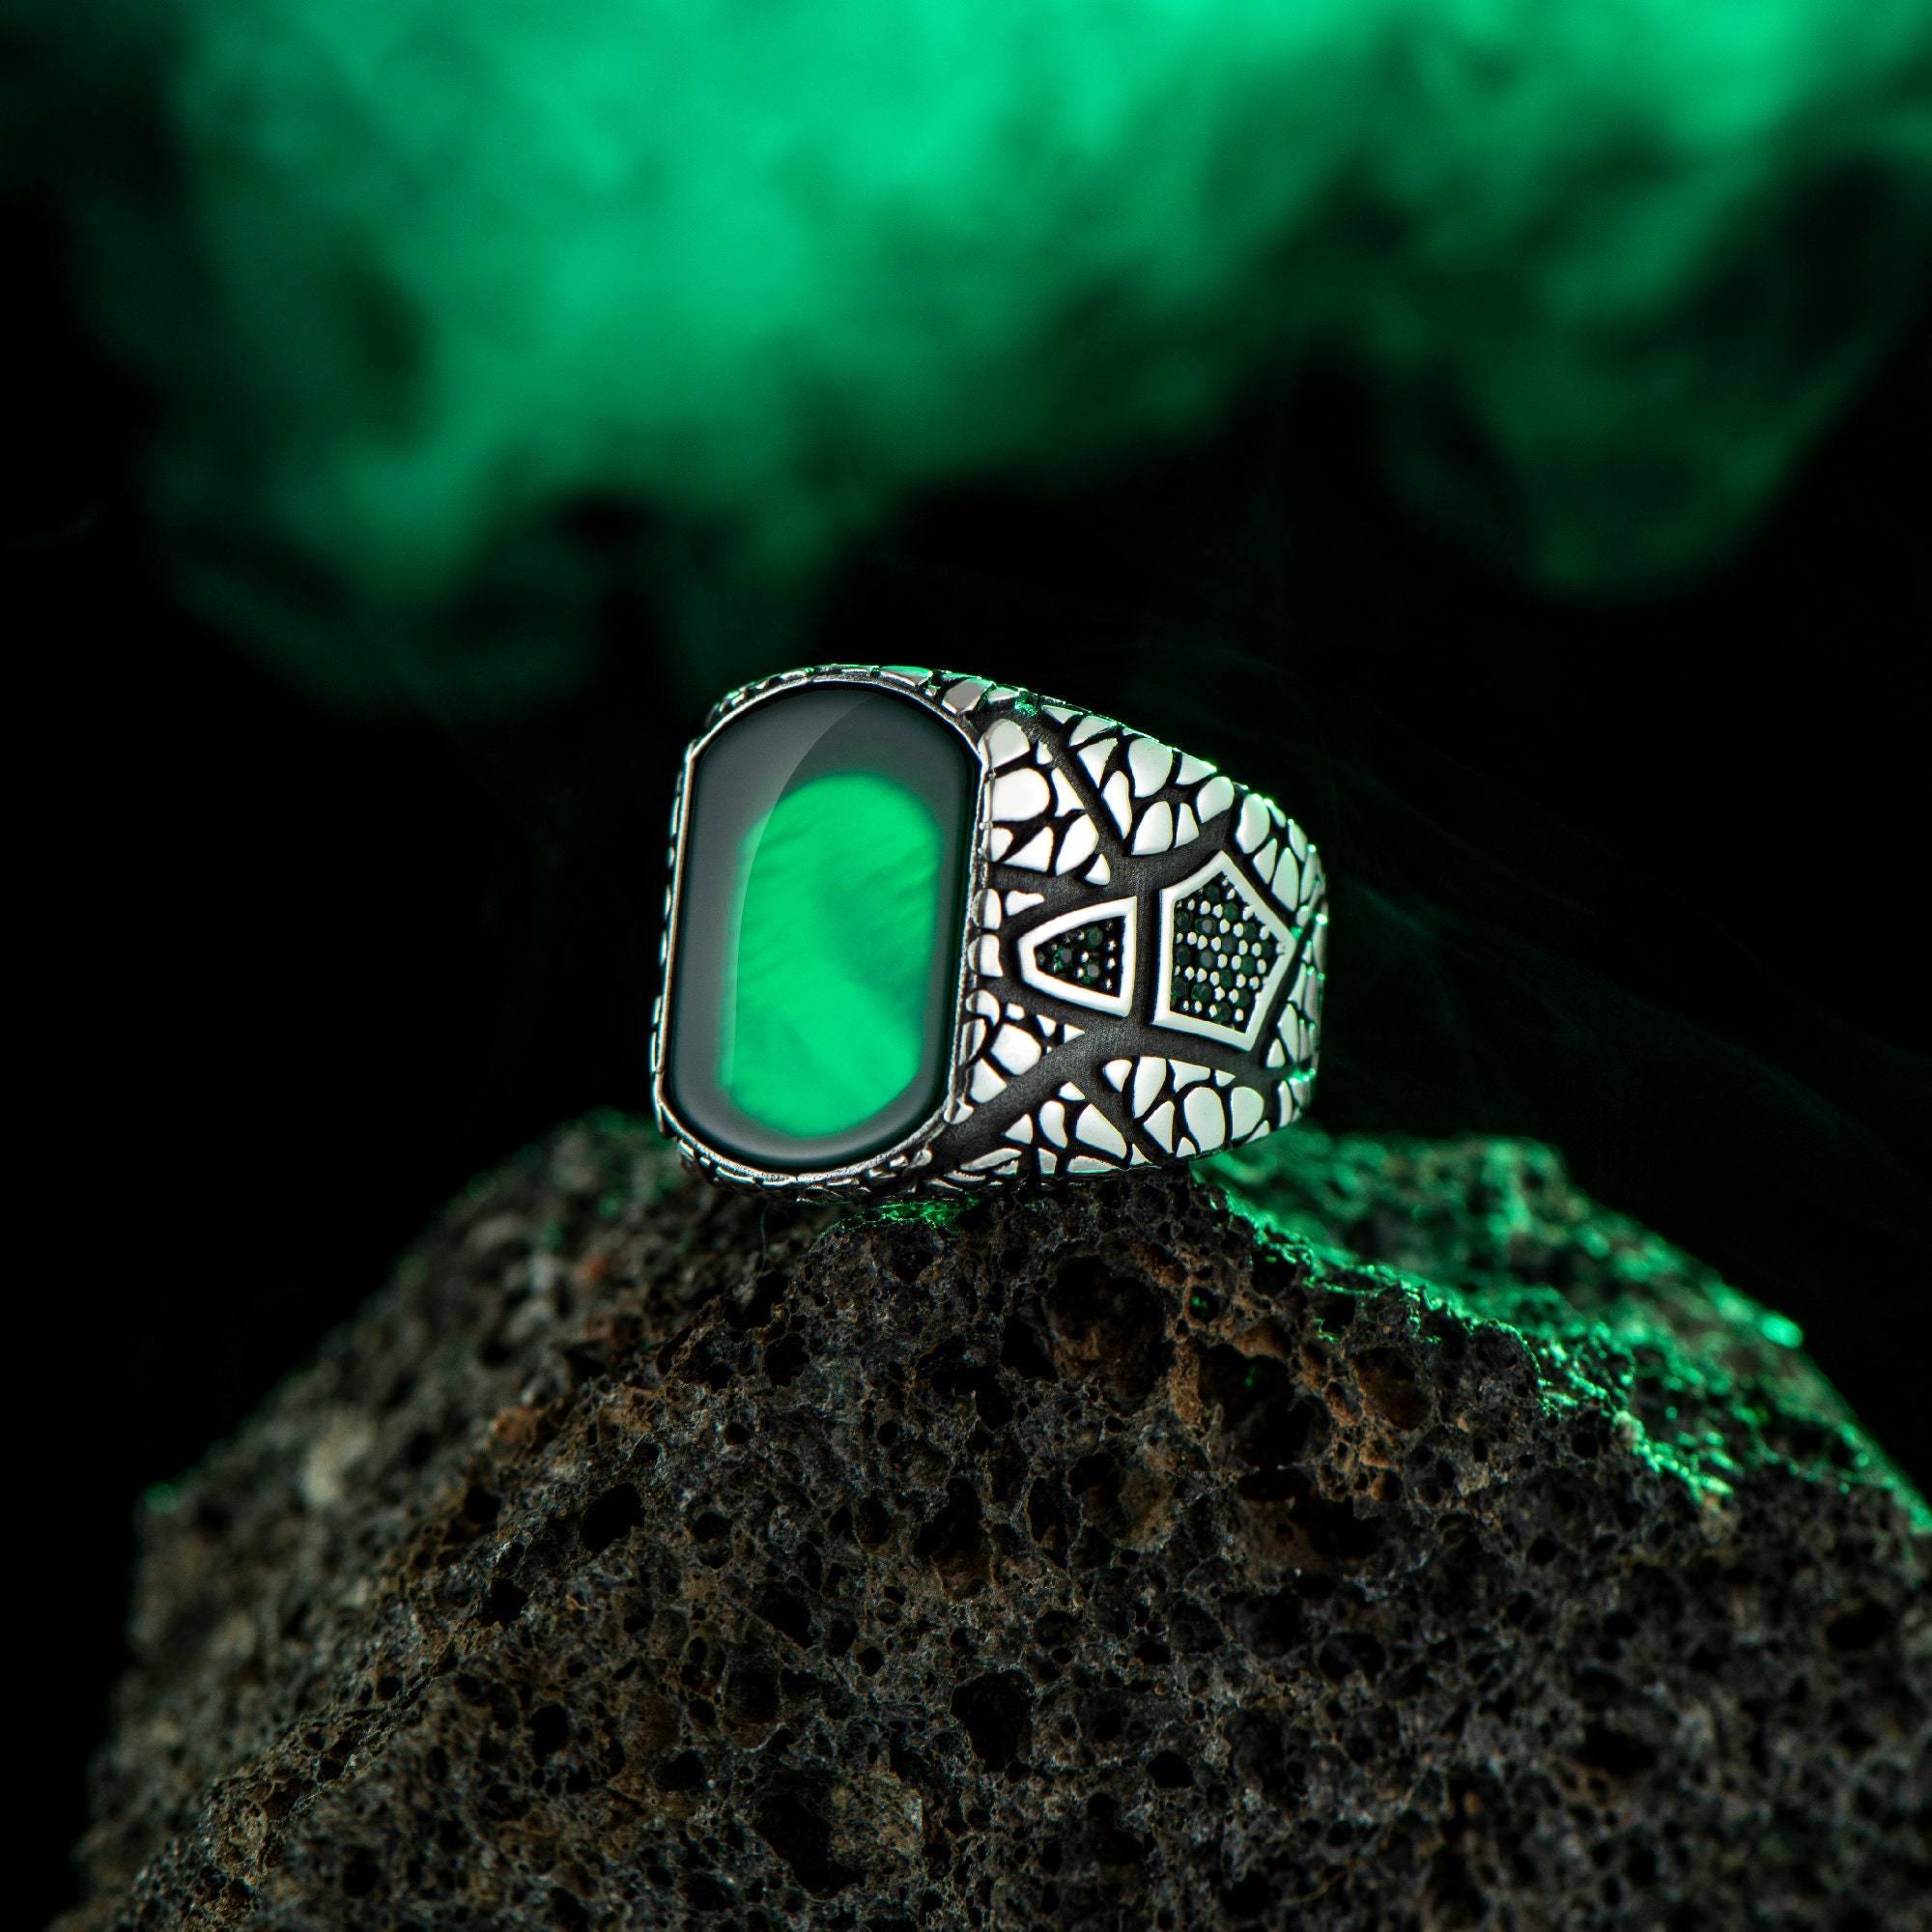 Man Vintage Ring, Green Agate Ring, Square Gemstone Ring - OXO SILVER